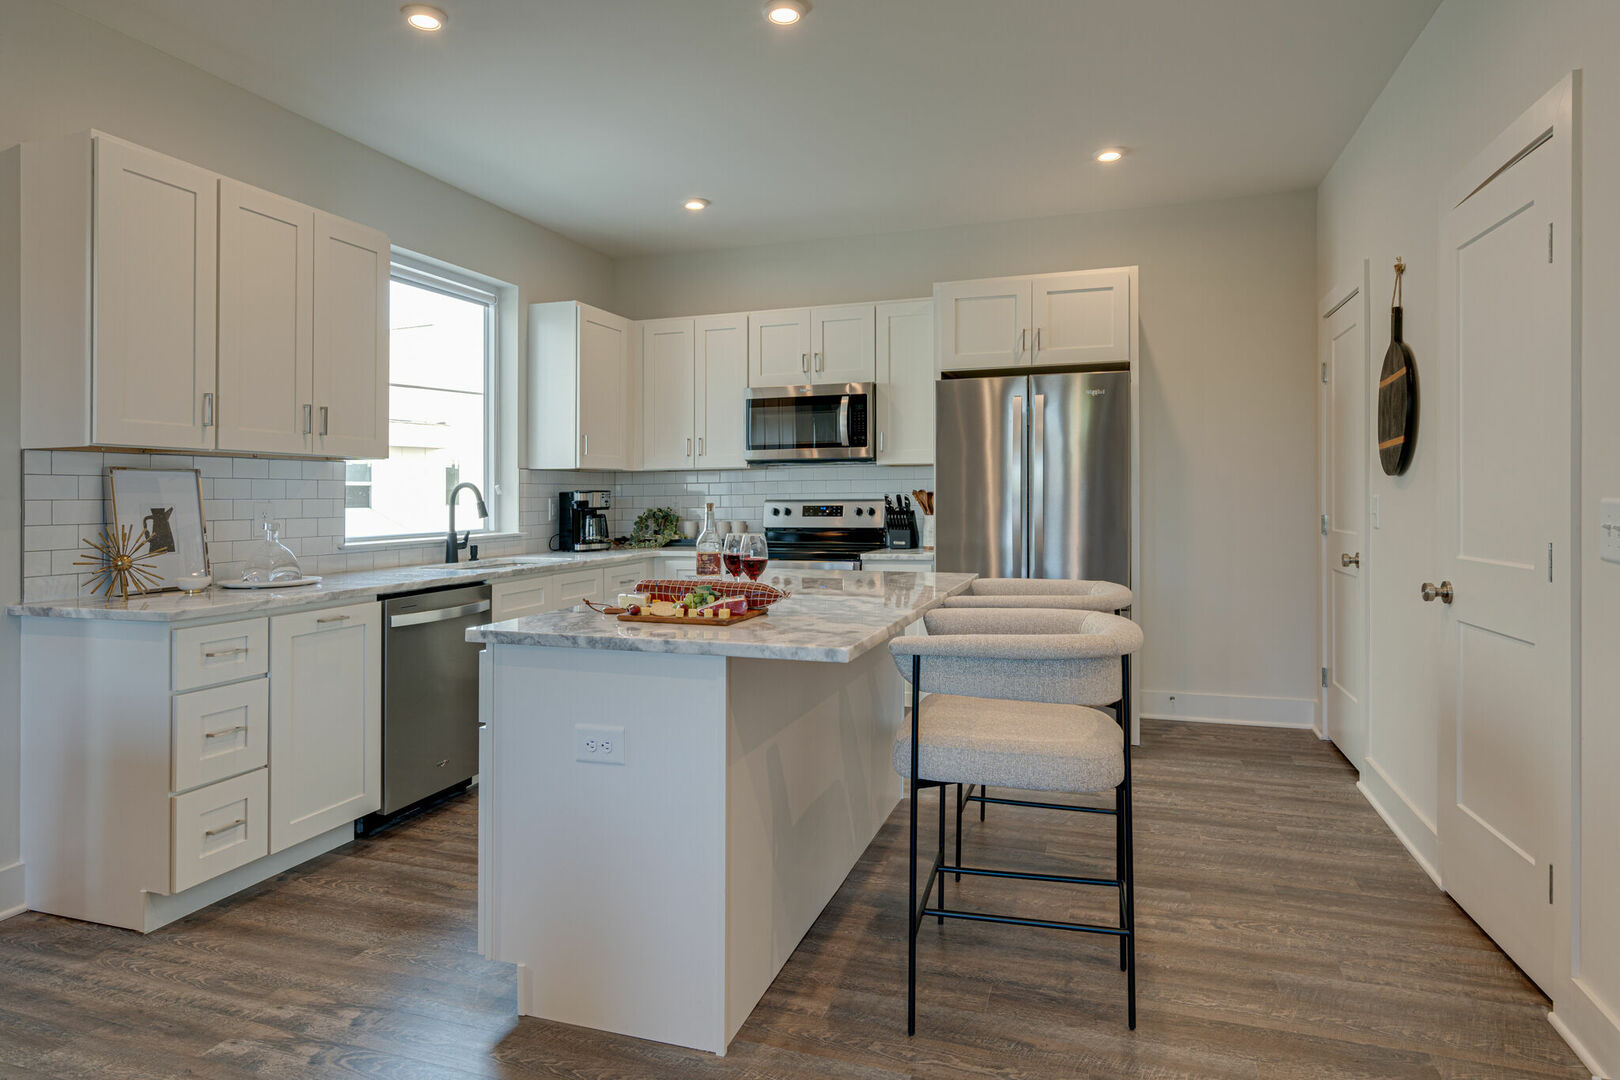 3rd Unit, 2nd Floor: Fully Equipped Kitchen stocked with your basic cooking essentials and stainless-steel appliances.